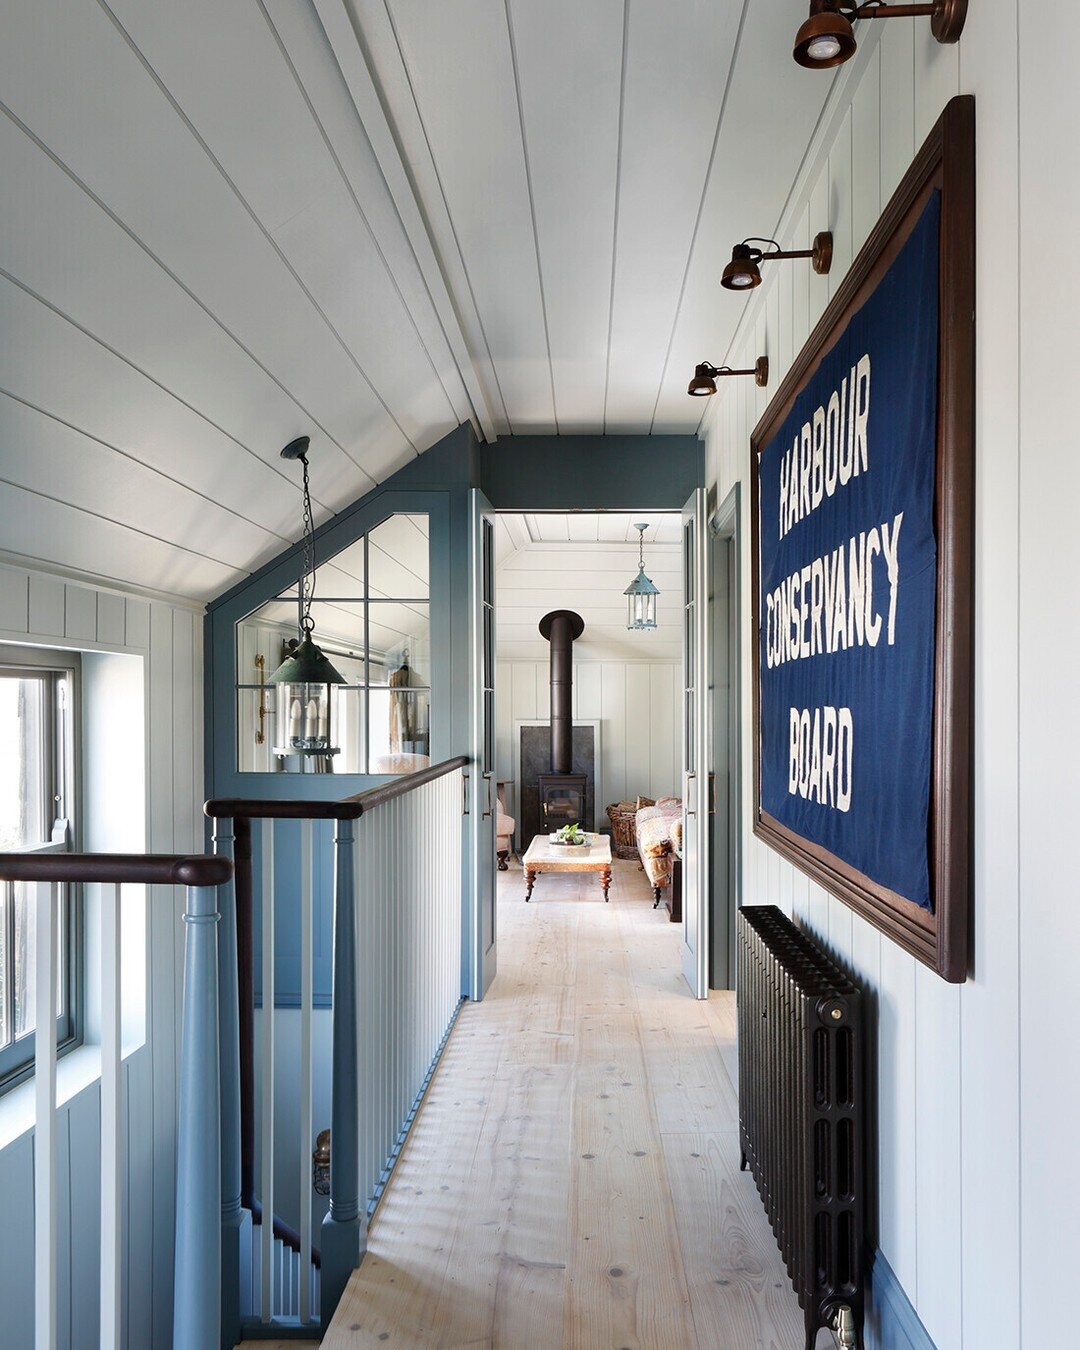 A connecting space is surely an unsung hero of the home. We wanted to make sure this landing had personality of its own. We commissioned an antique flag artwork at the centrepiece and placed carefully sourced objects &amp; antiques in pride of place 